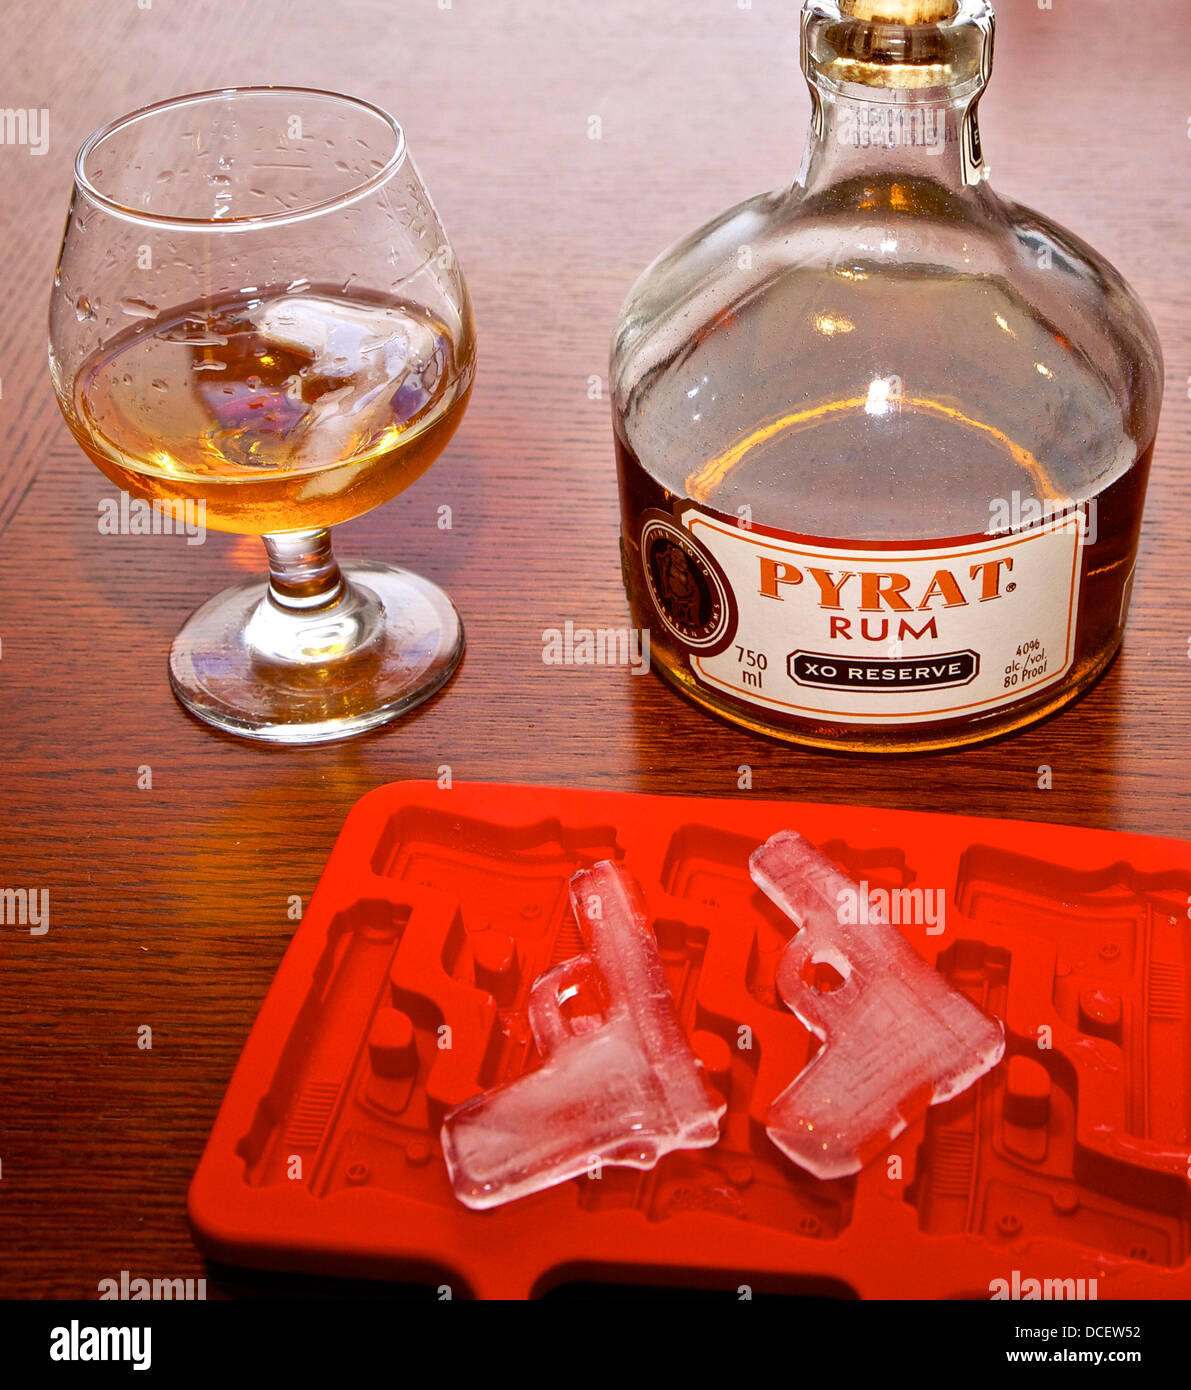 Bottle and snifter of Pyrat rum and gun shaped ice cubes Stock Photo